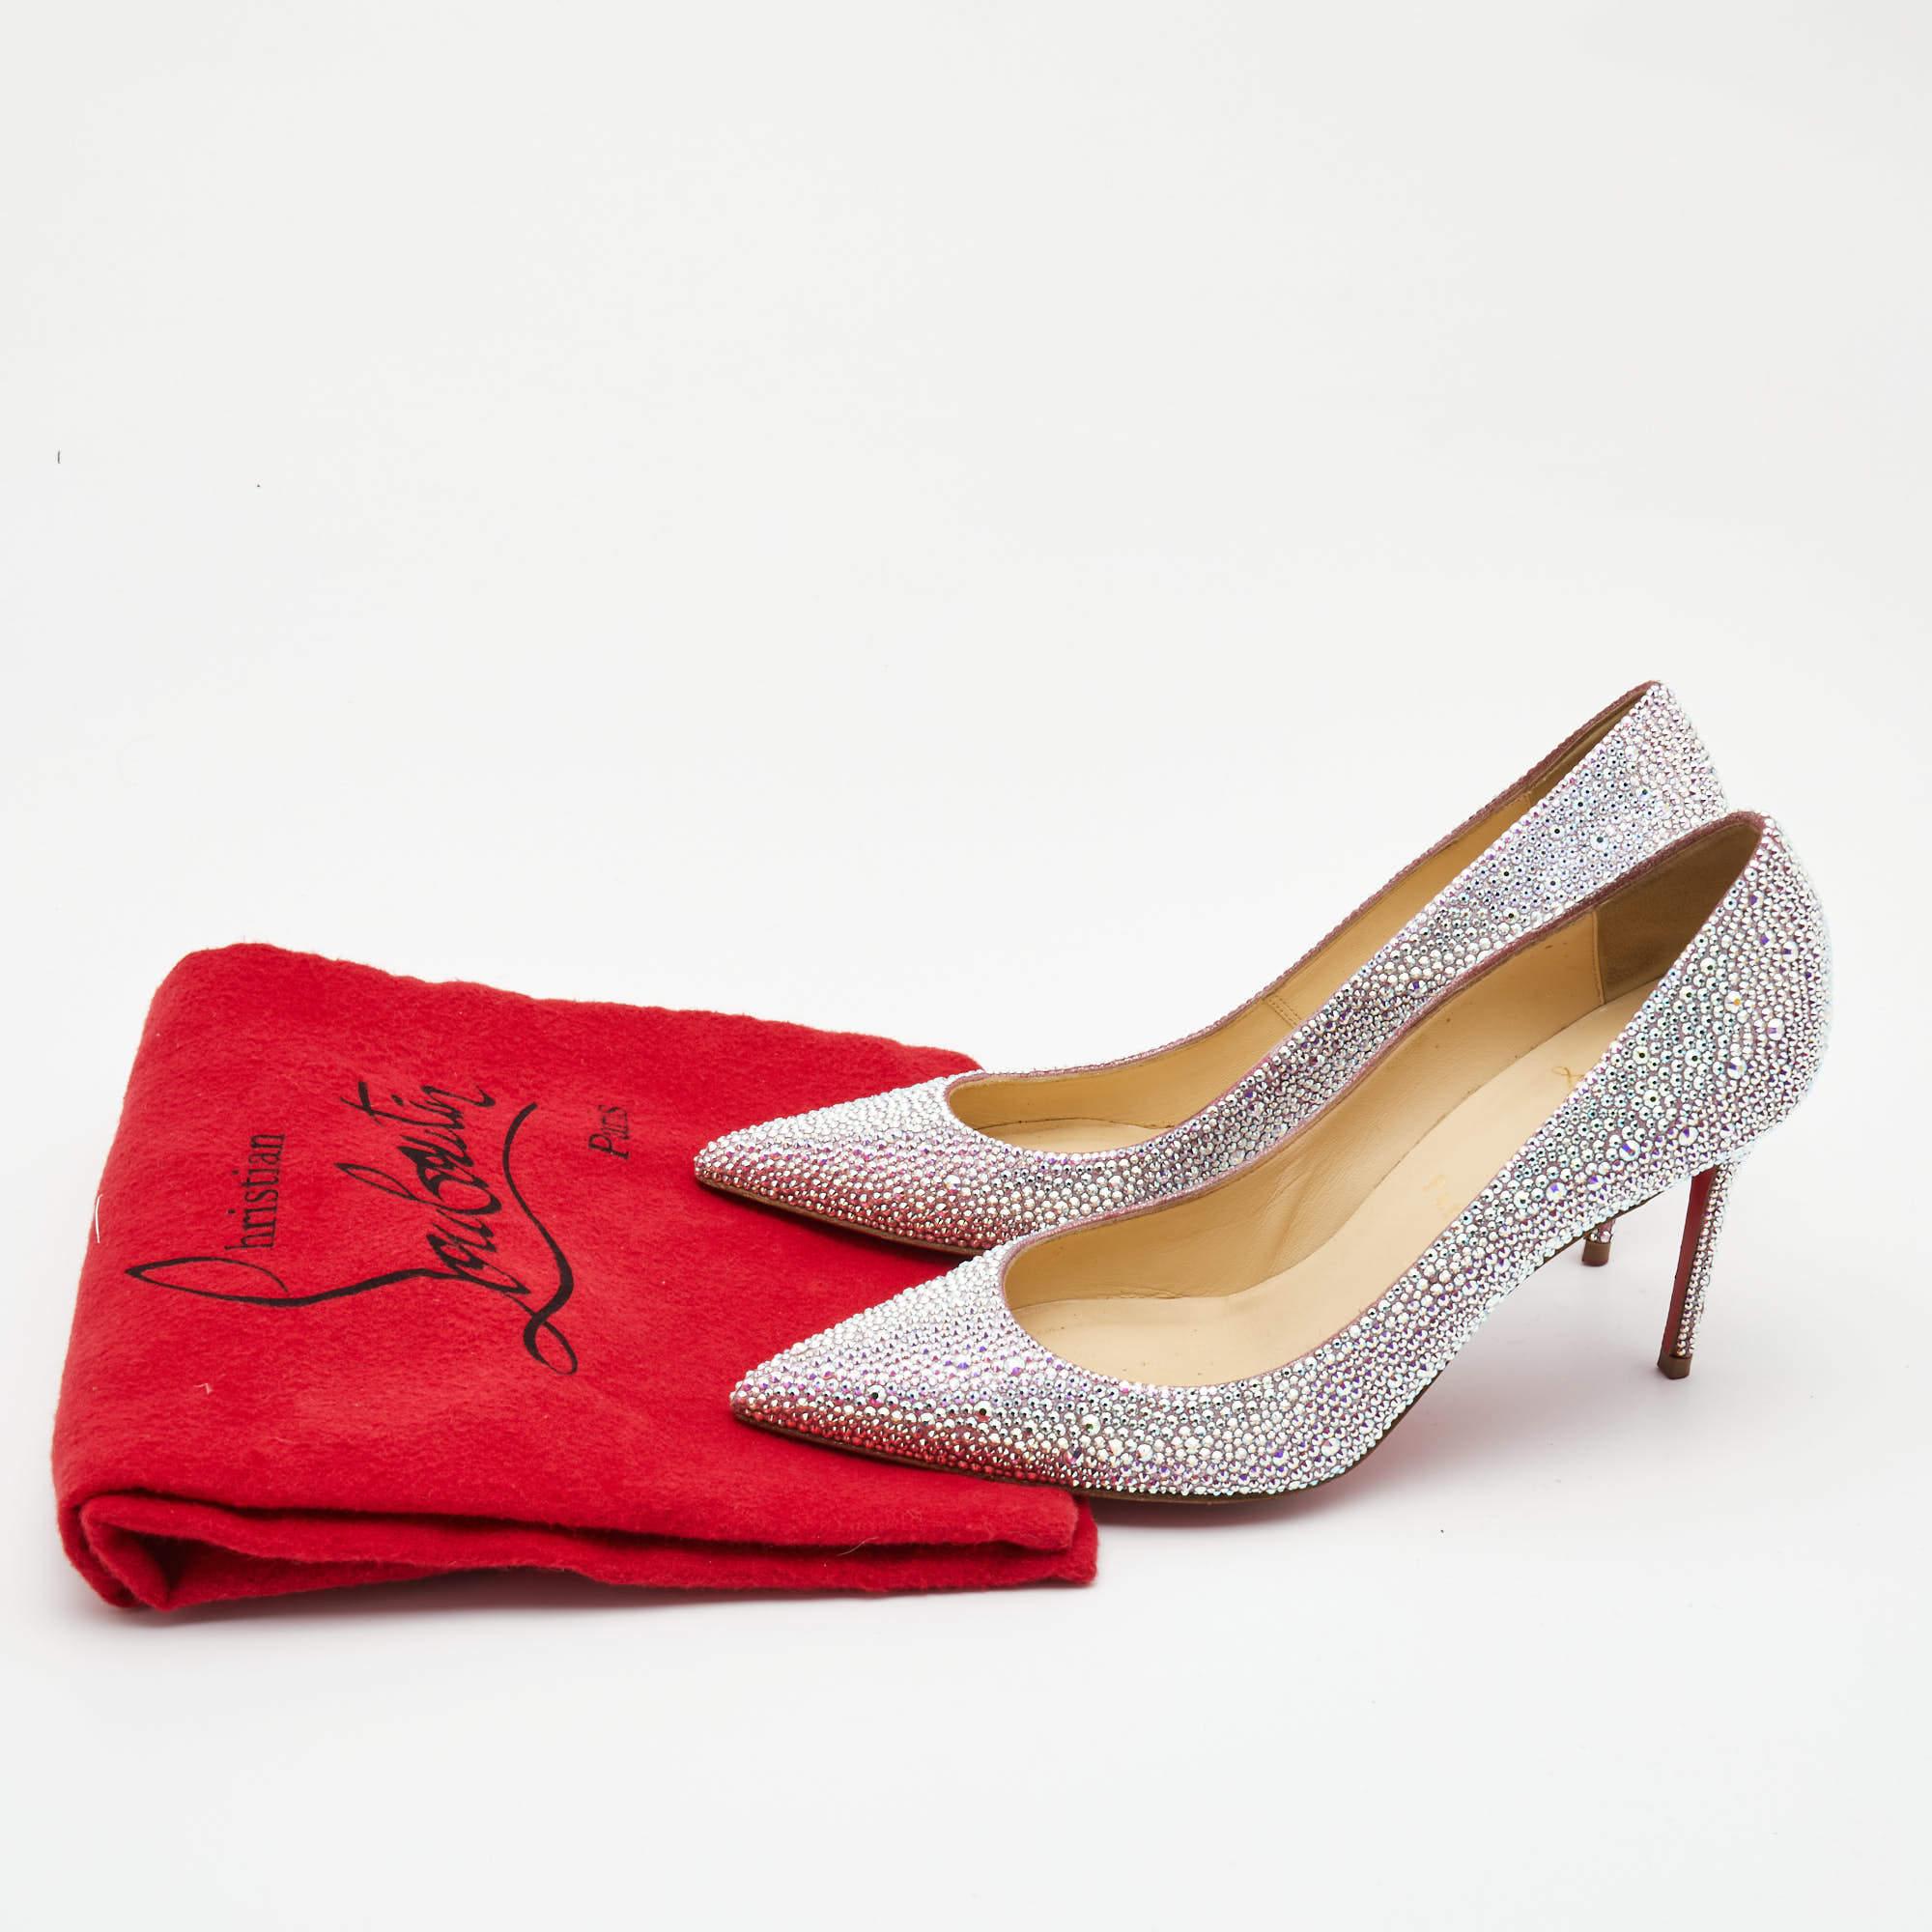 Christian Louboutin Metallic Two Tone Leather Kate Strass Pumps Size 38 For Sale 2